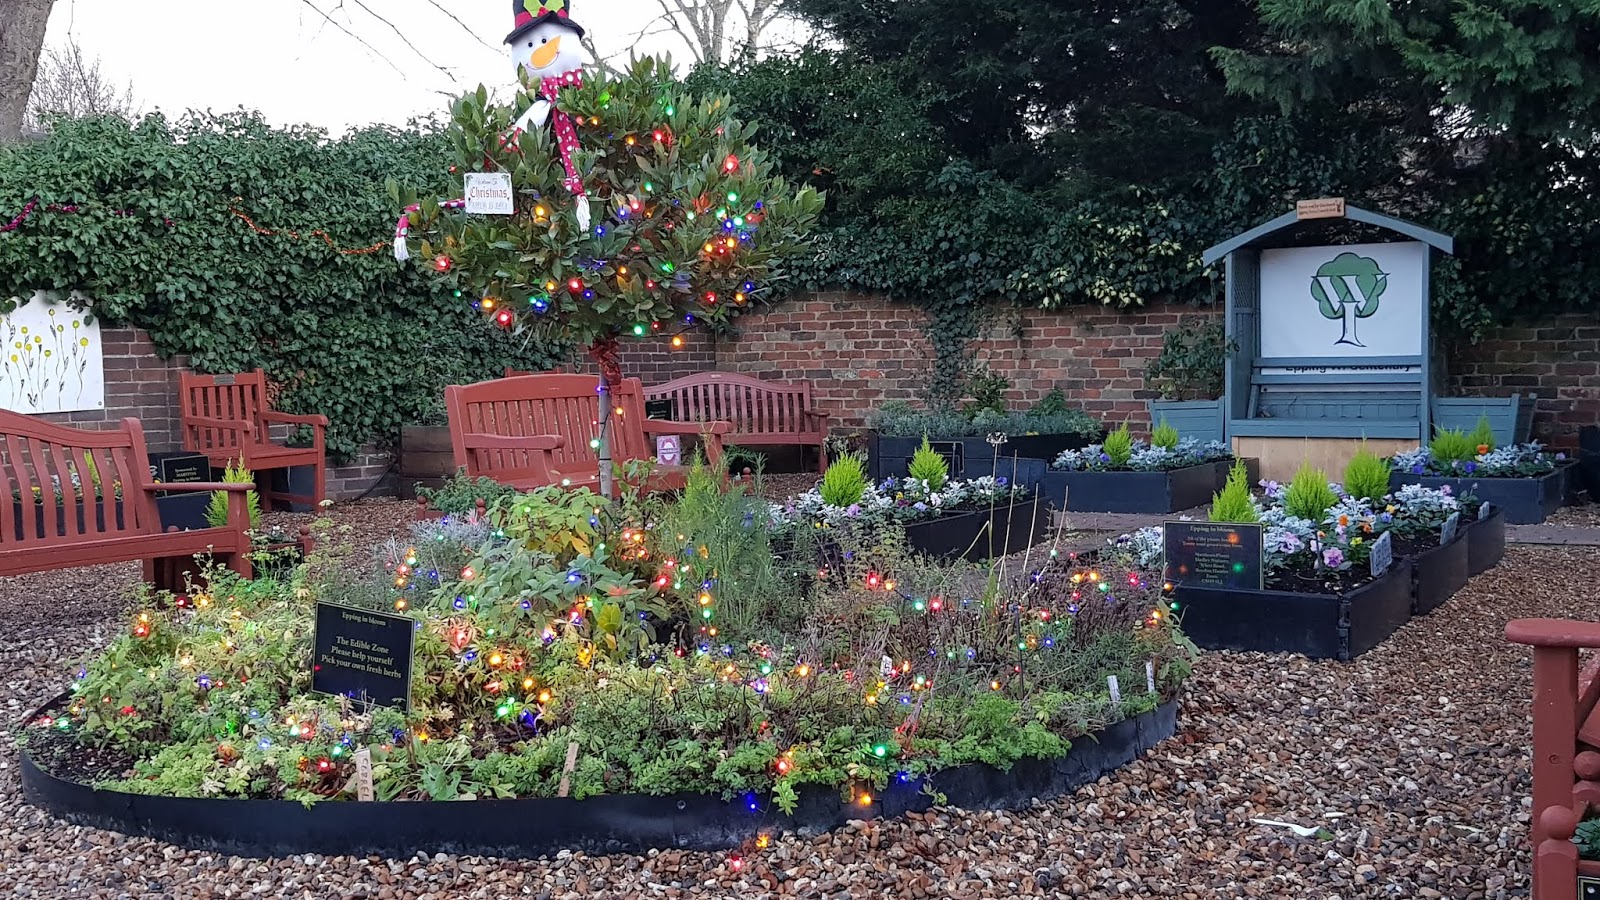 Christmas lights in the Epping community garden, Essex, UK